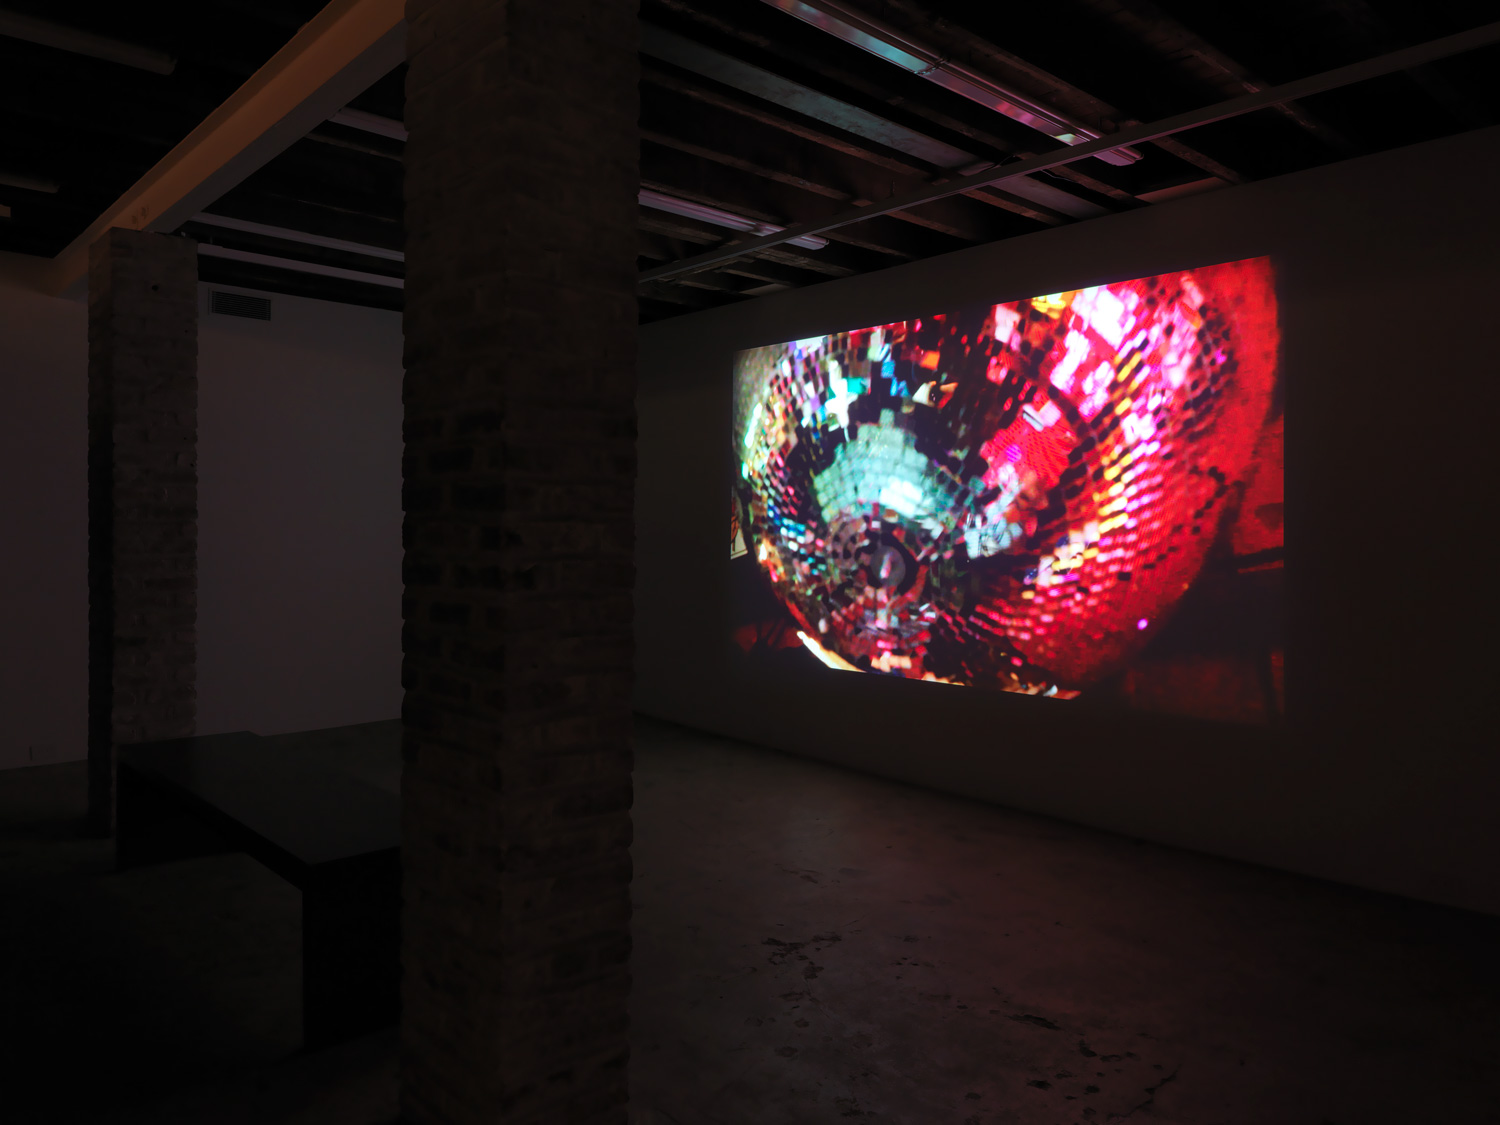 Keren Cytter, Rose Garden, 2014, digital HD video with sound, 8 min, 57 sec. Edition 4 of 5 + 2 Artist Prints. Courtesy of the artist and Pilar Corrias.